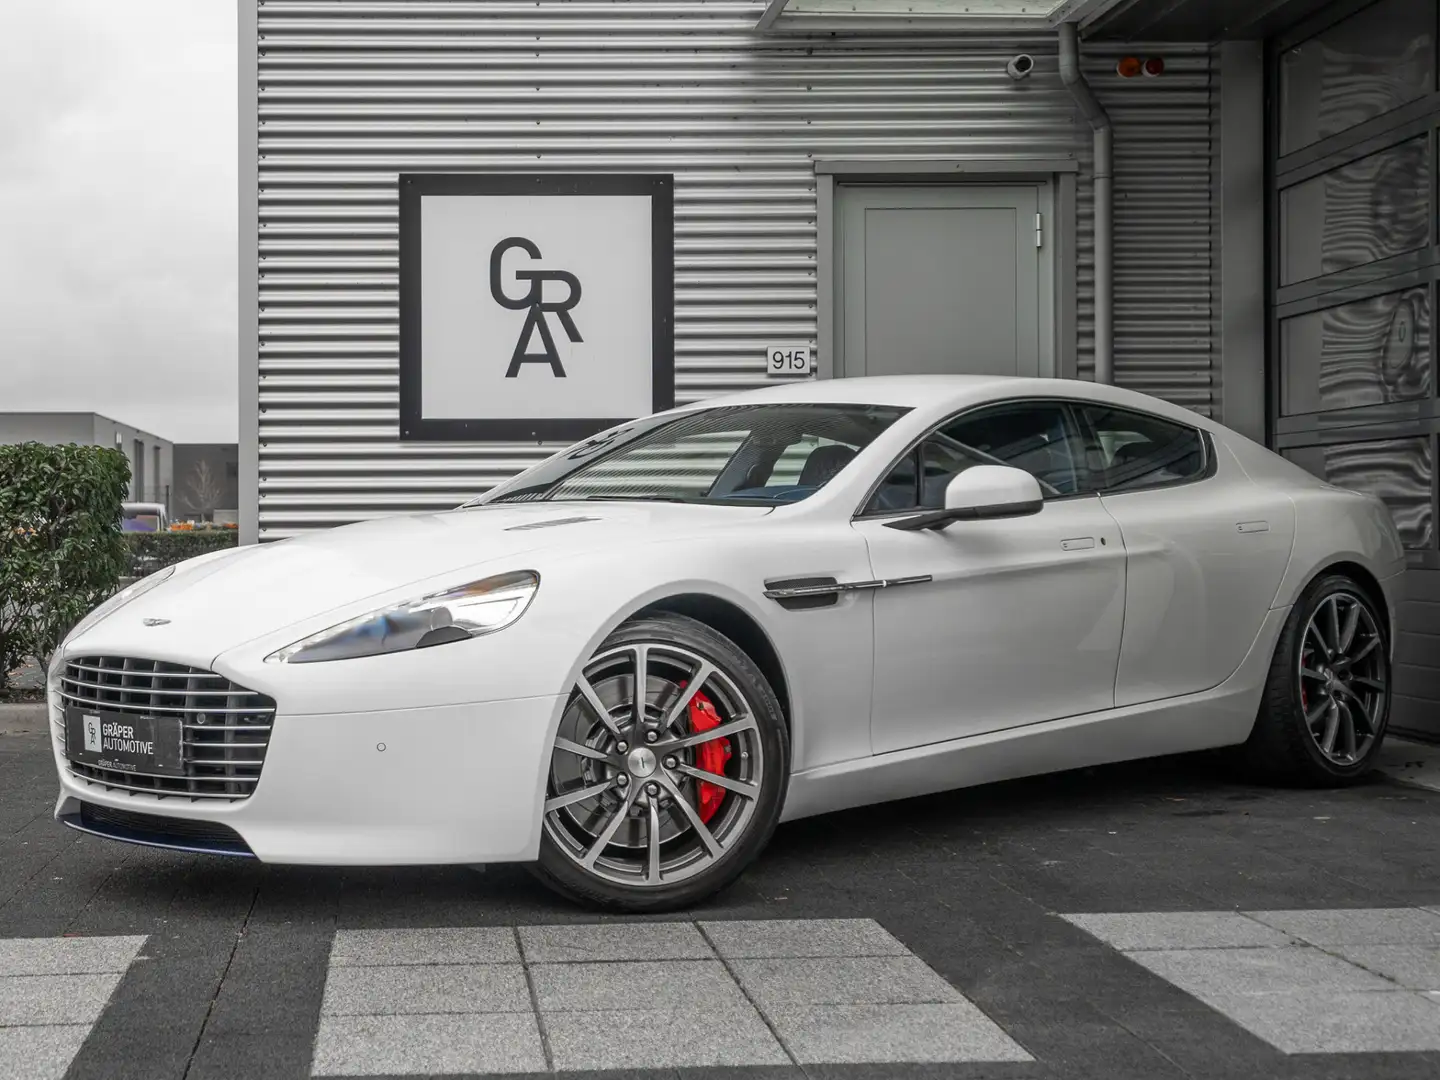 Aston Martin Rapide S 6.0 V12 ‘Britain is Great’ Edition by Q 1/8 Blanco - 2